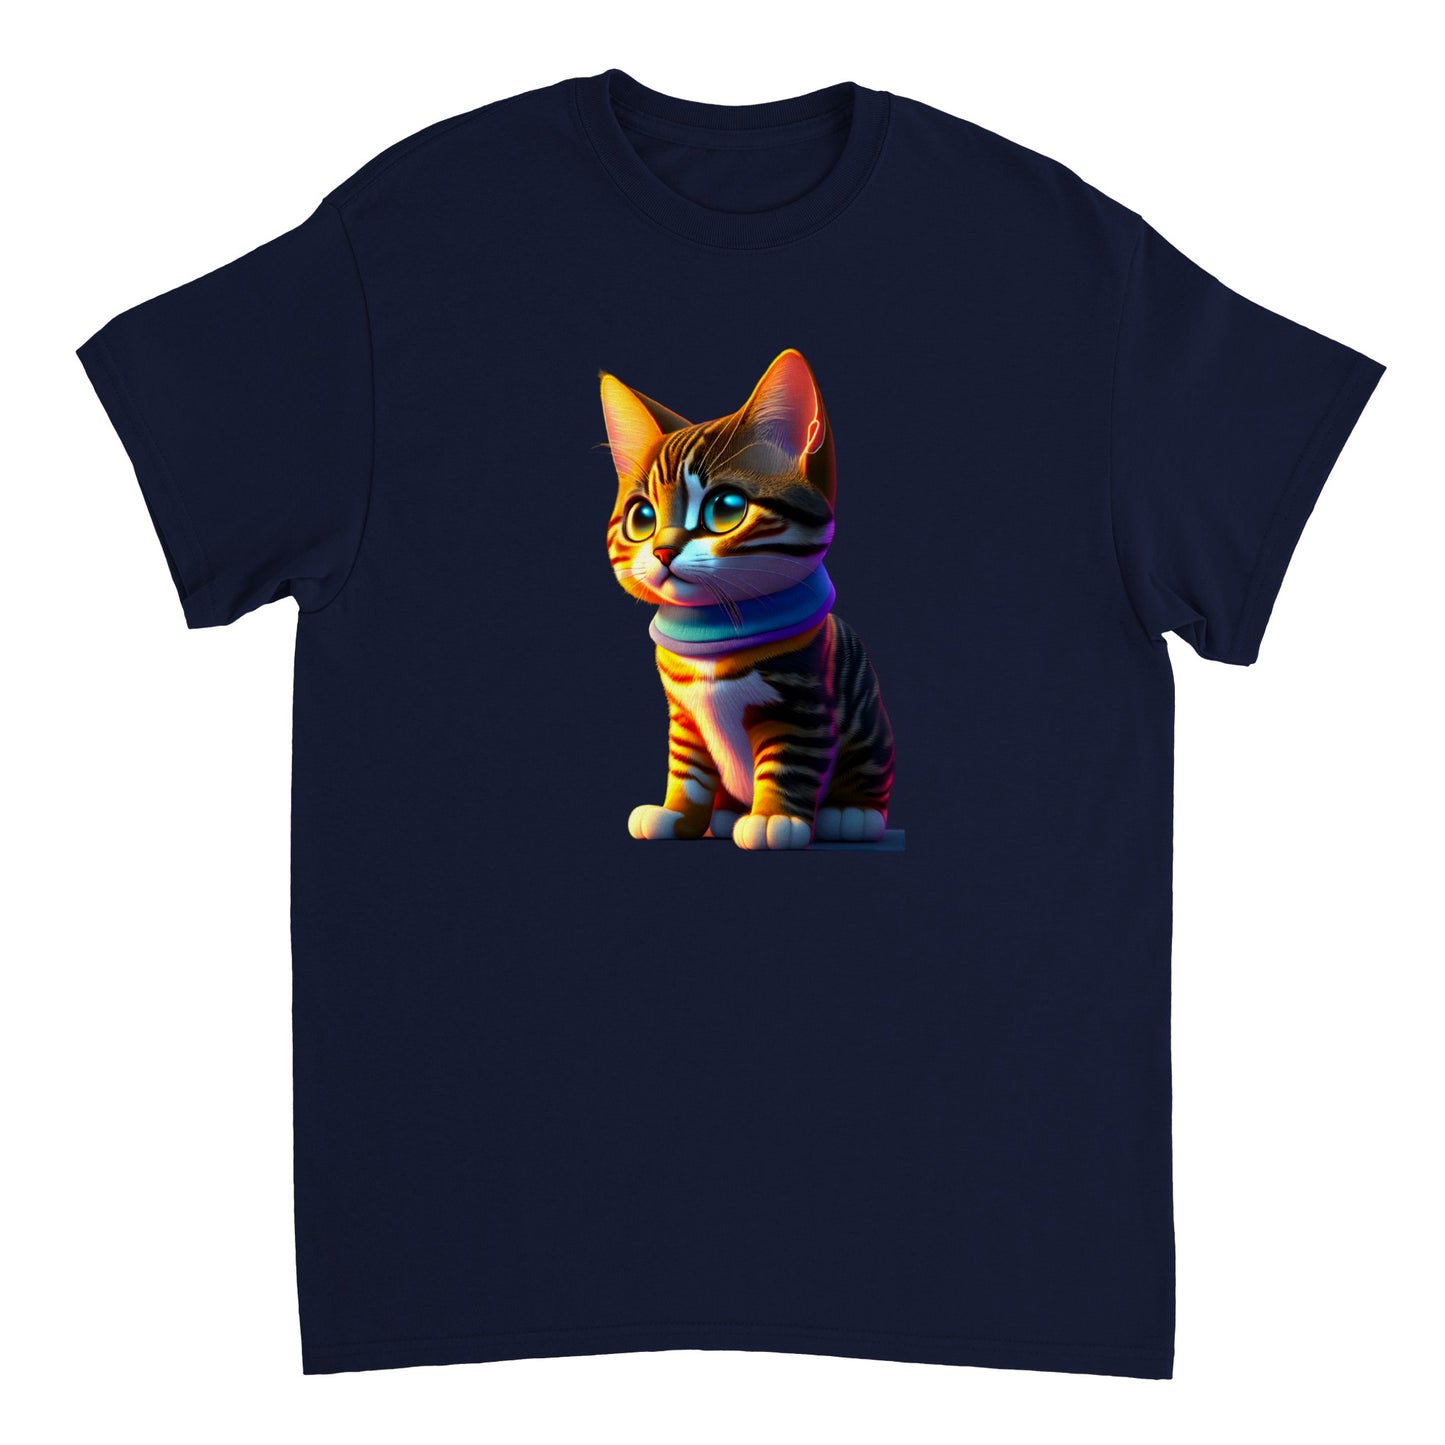 Adorable, Cool, Cute Cats and Kittens Toy - Heavyweight Unisex Crewneck T-shirt 32